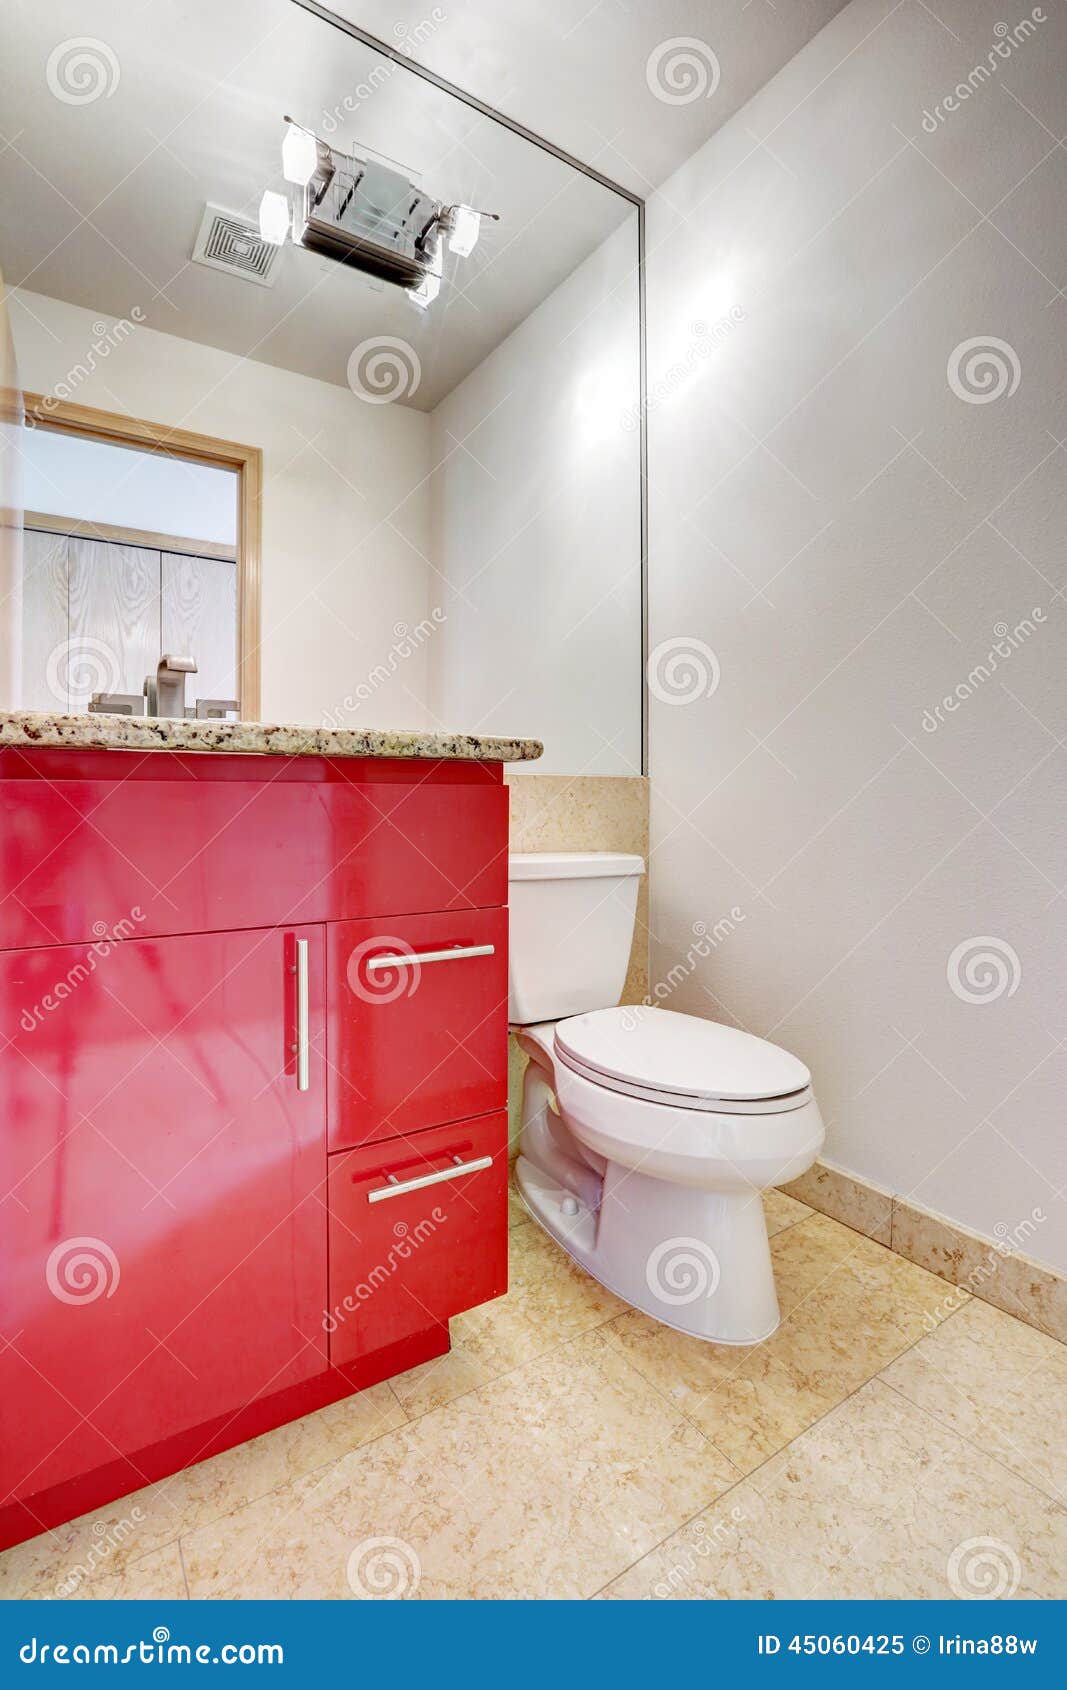 Red Bathroom Vanity Cabinet With Granite Top And Large Mirror Stock Image Image Of Room Floor 45060425